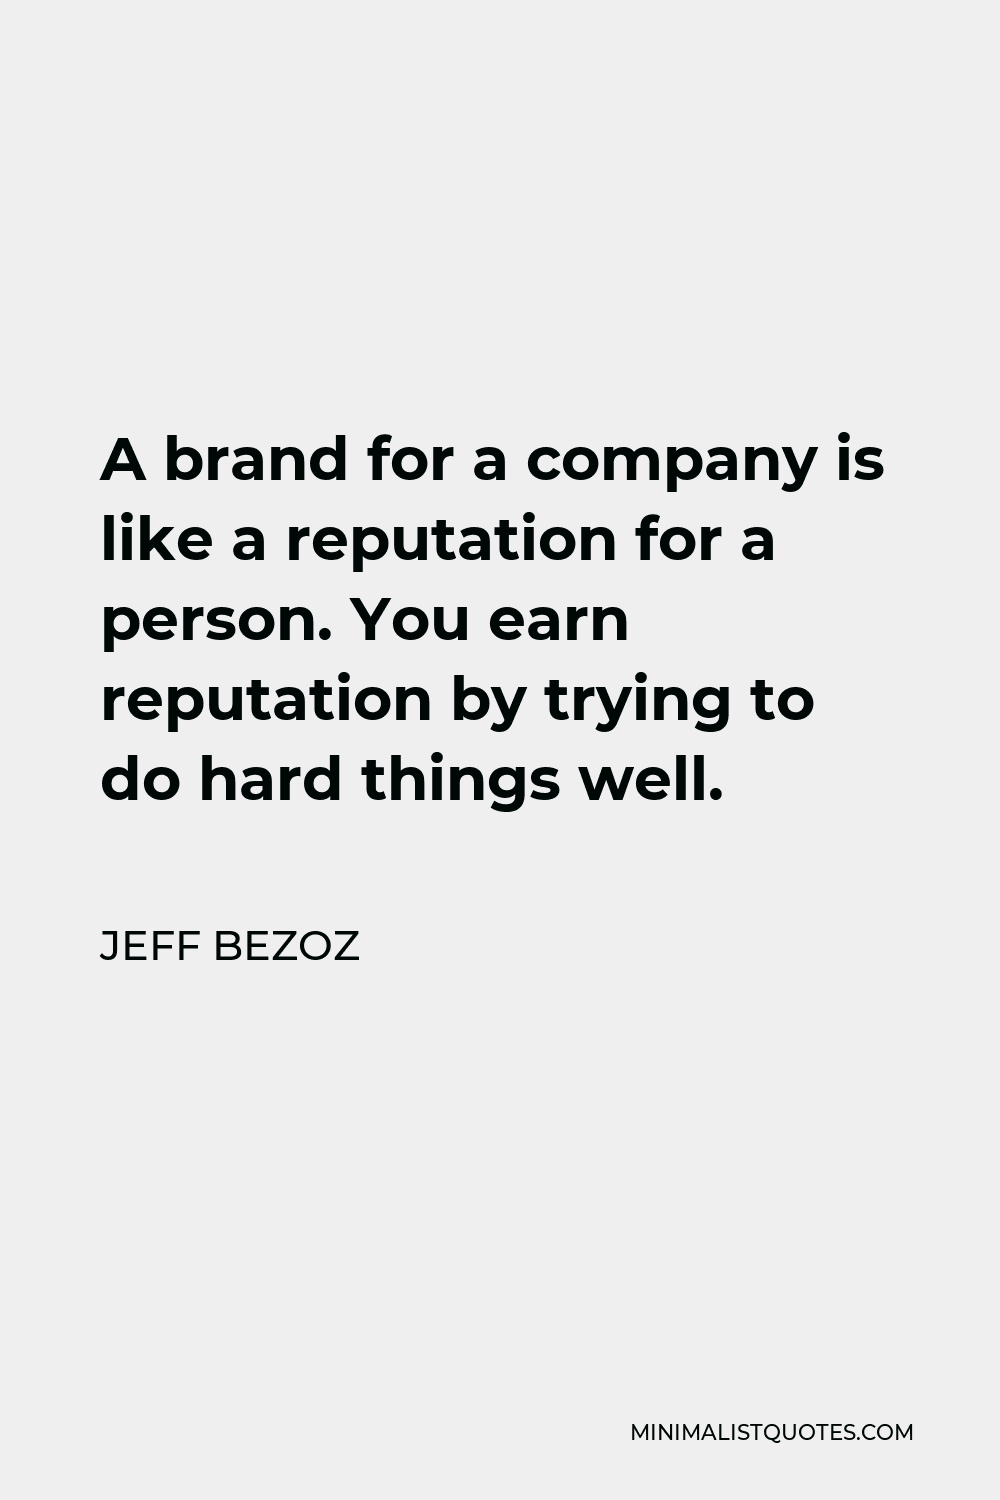 Jeff Bezoz Quote - A brand for a company is like a reputation for a person. You earn reputation by trying to do hard things well.